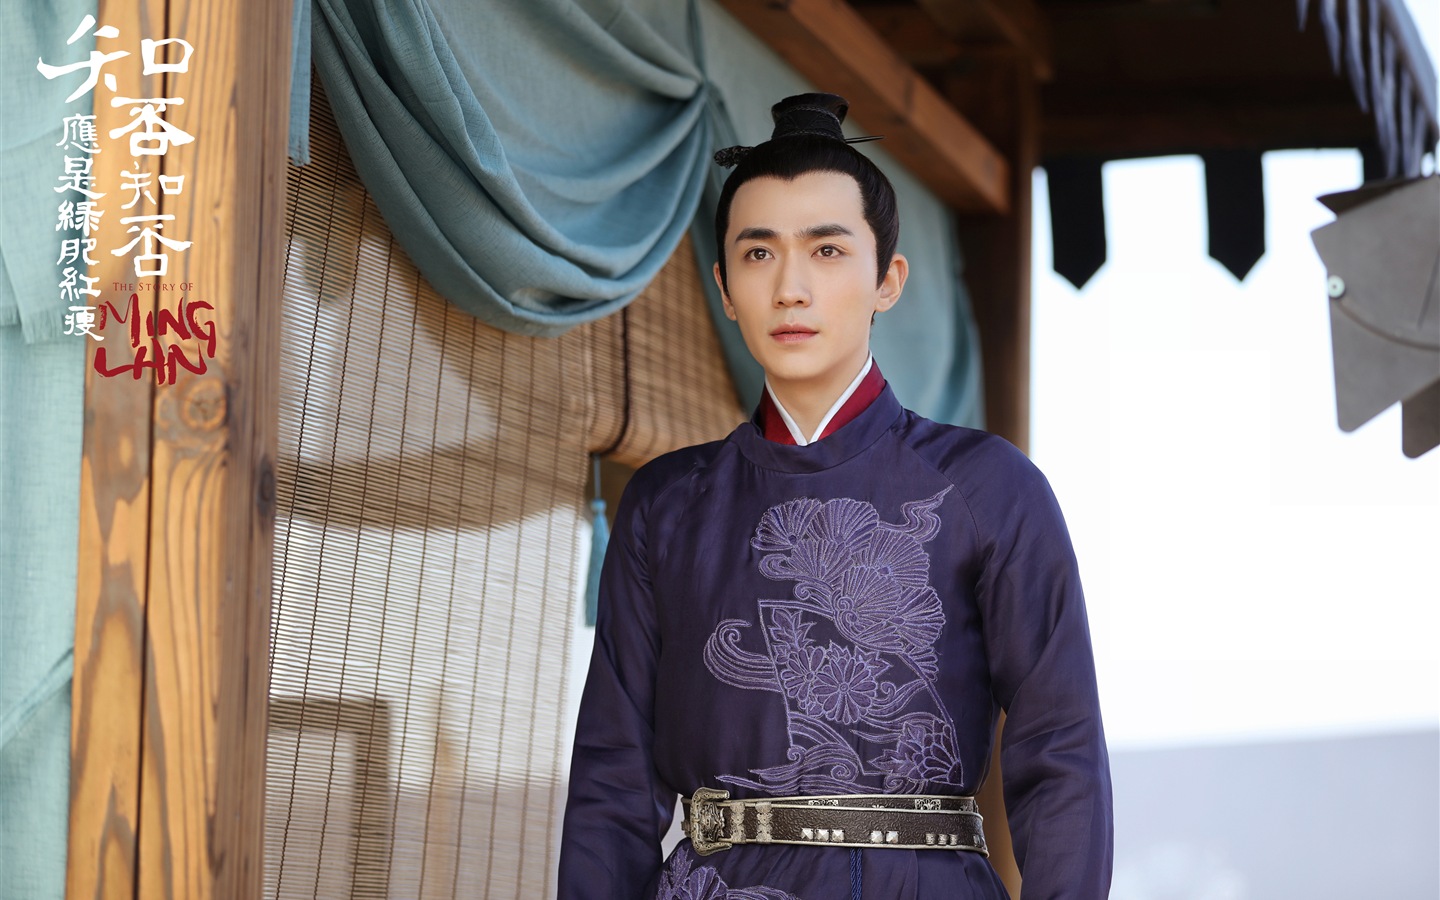 The Story Of MingLan, TV series HD wallpapers #24 - 1440x900